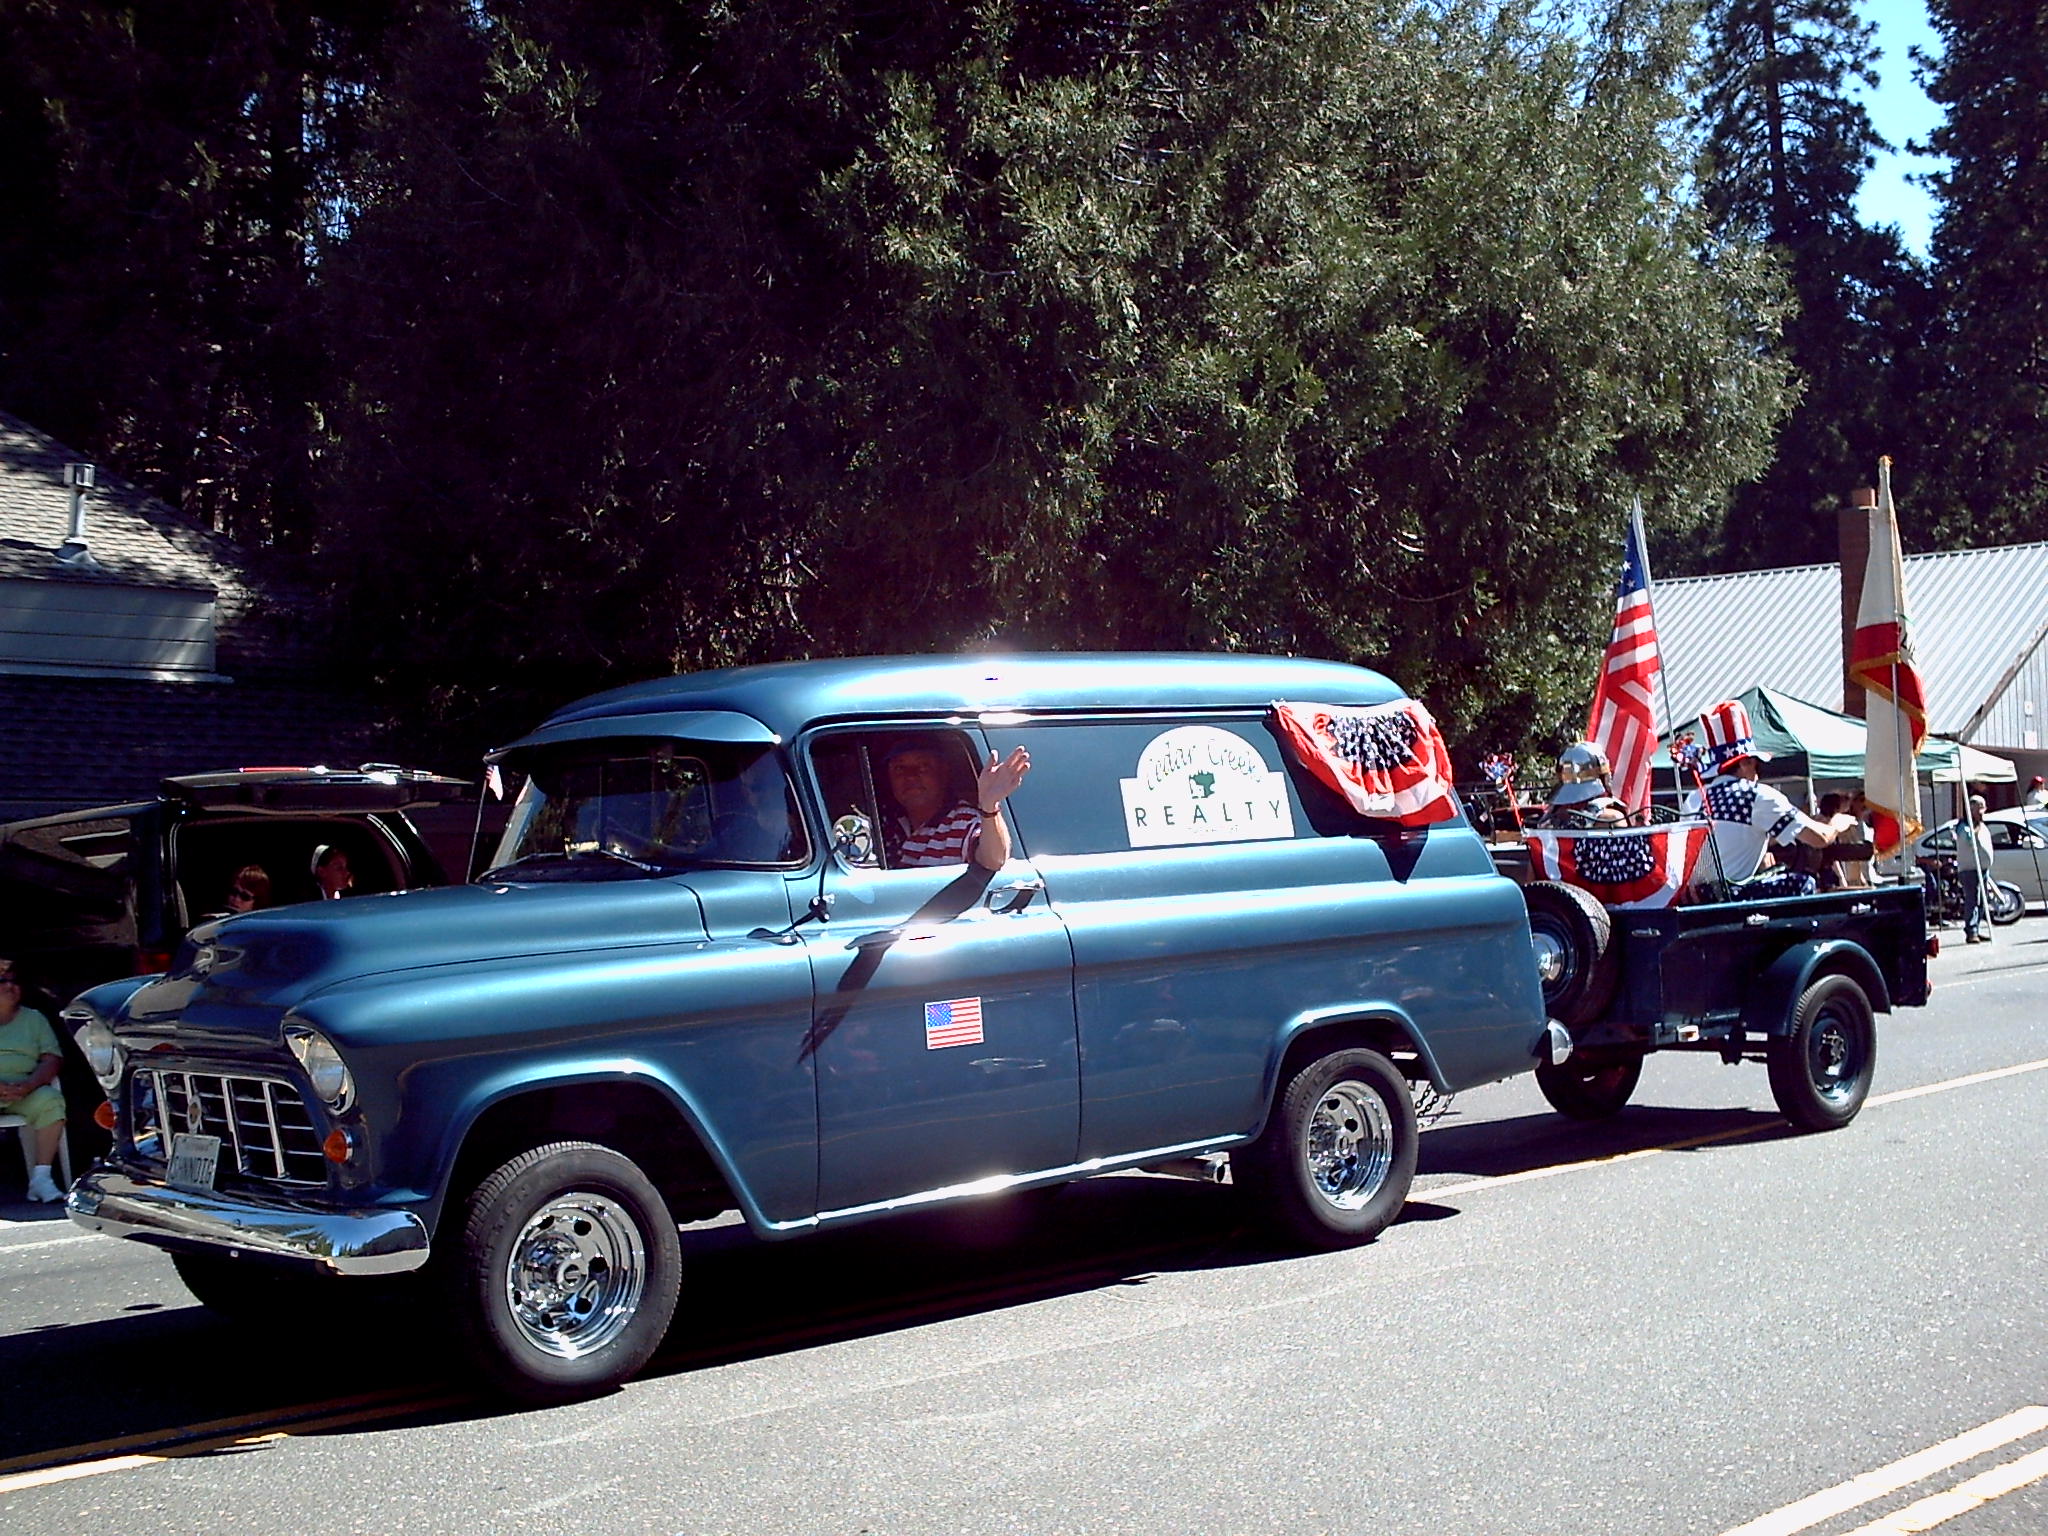 2006 Arnold Independence Parade